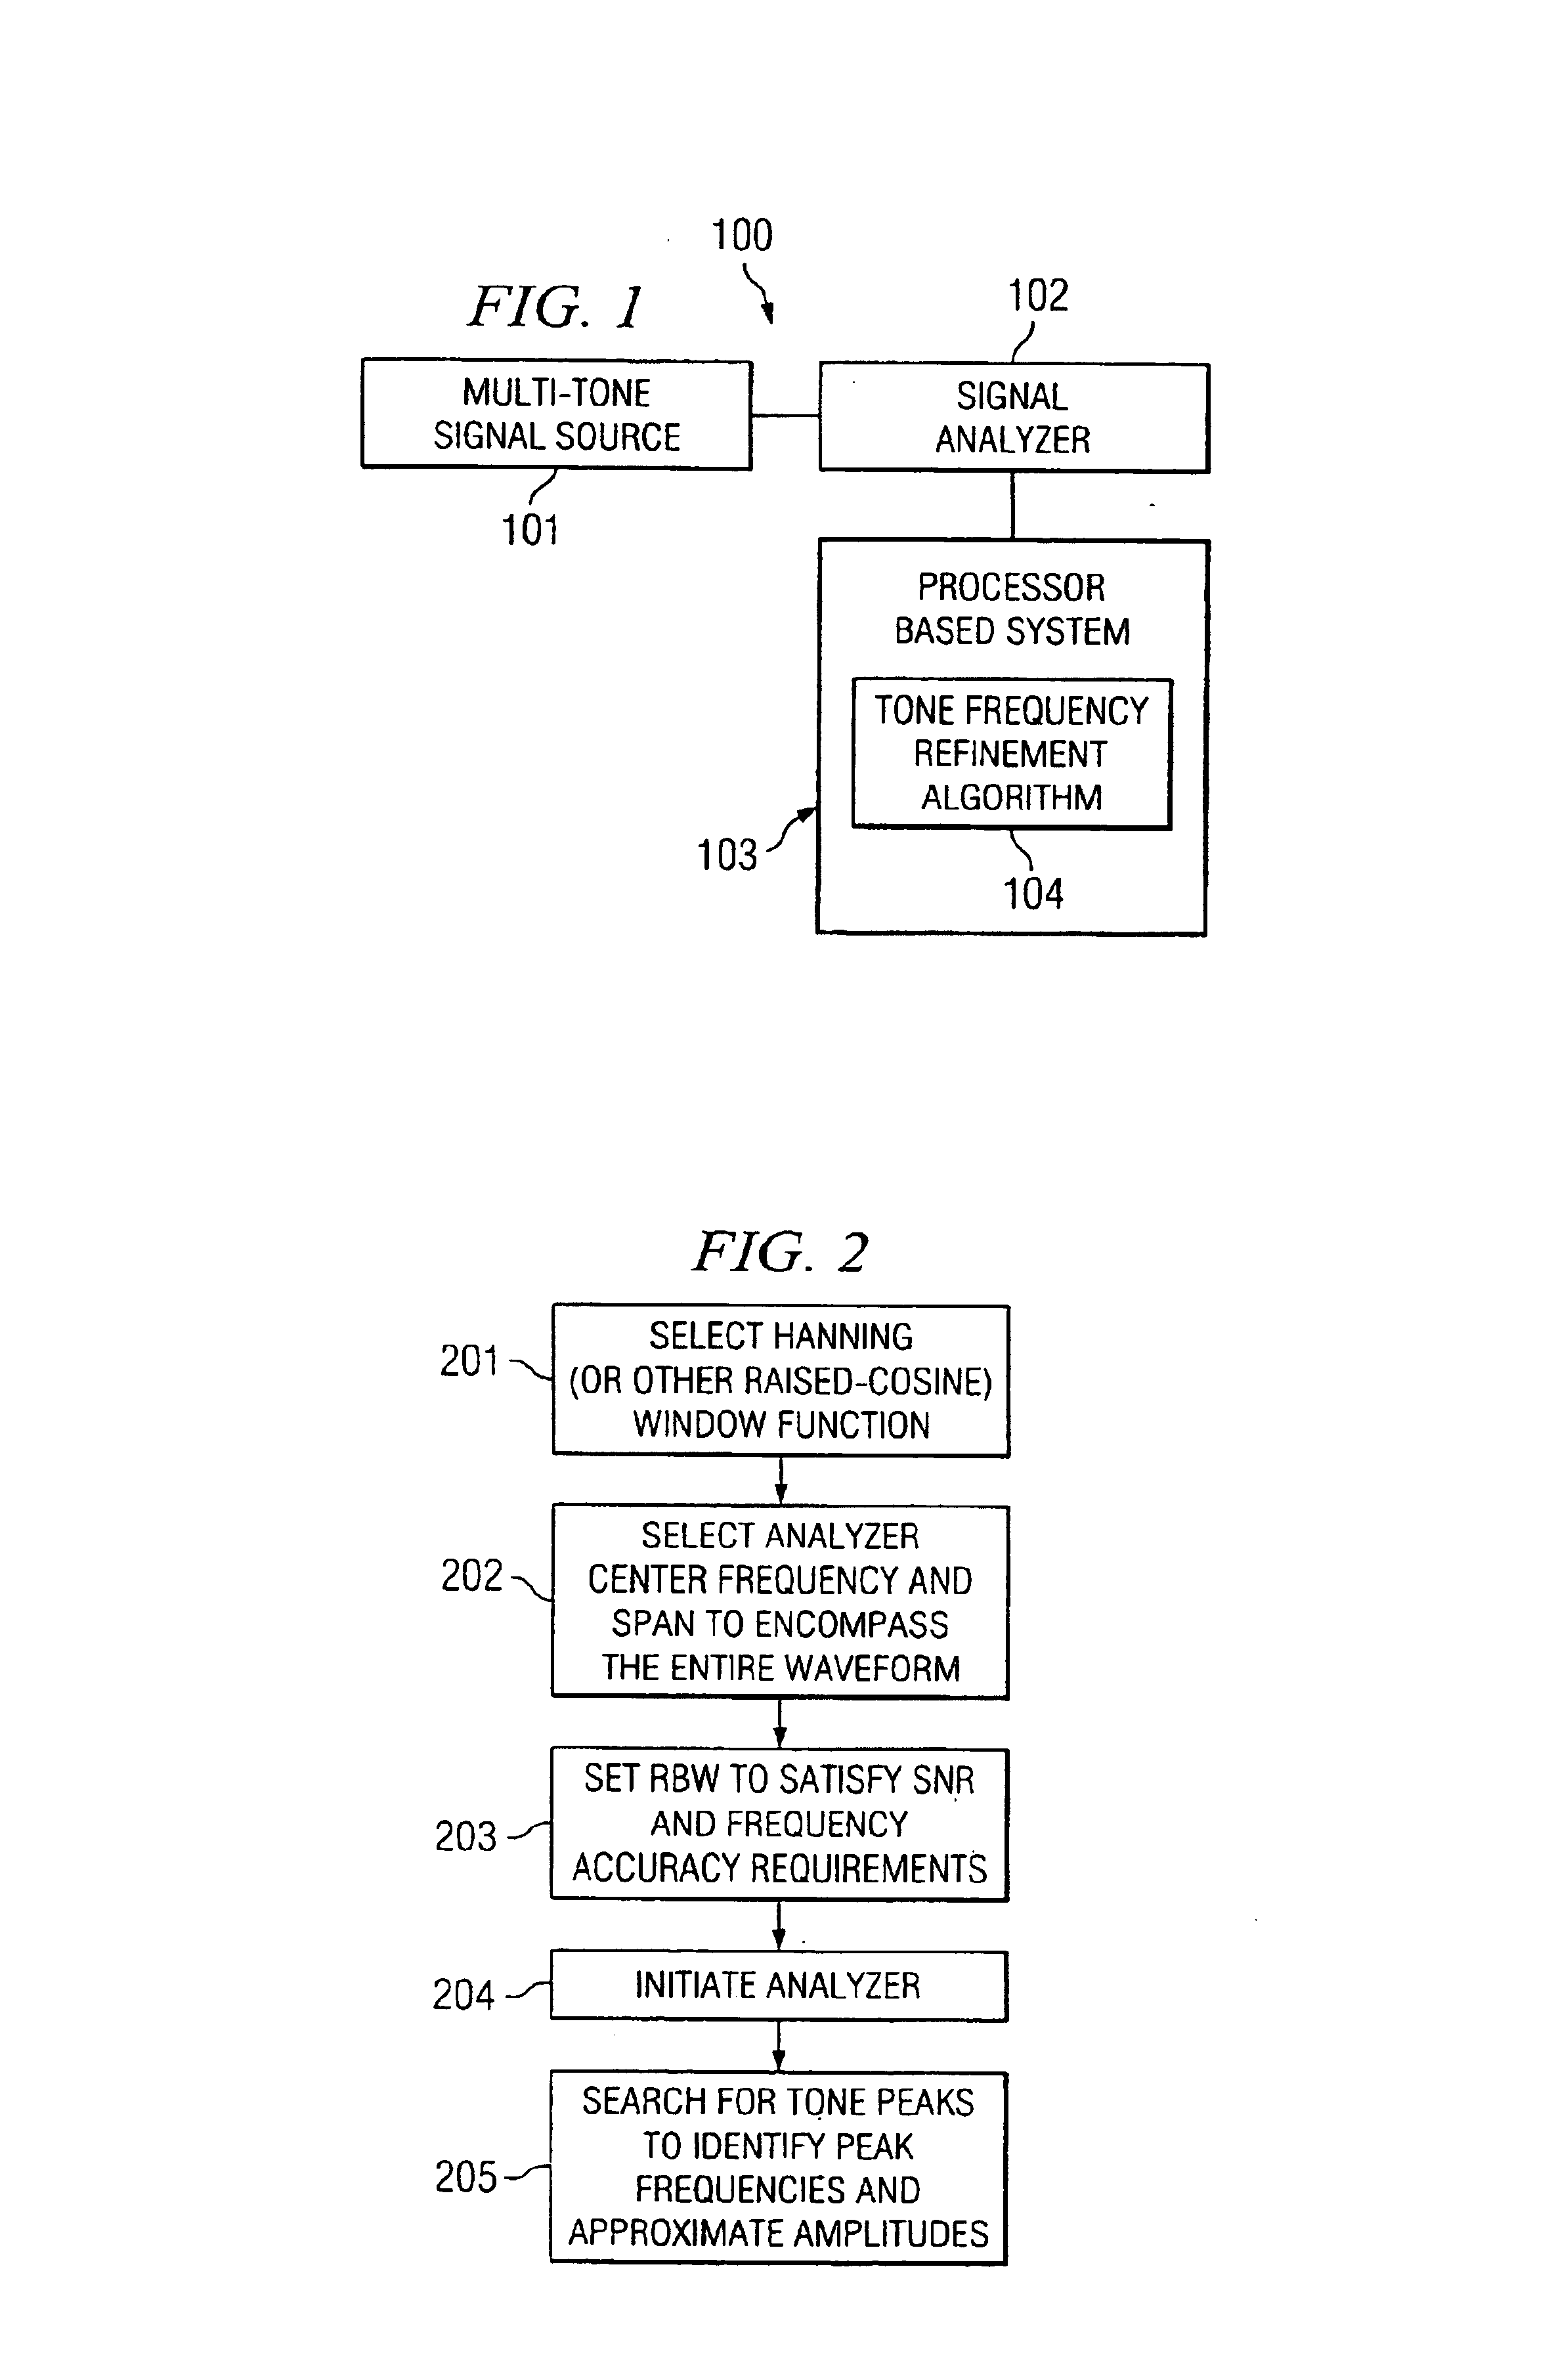 Systems and methods for performing analysis of a multi-tone signal